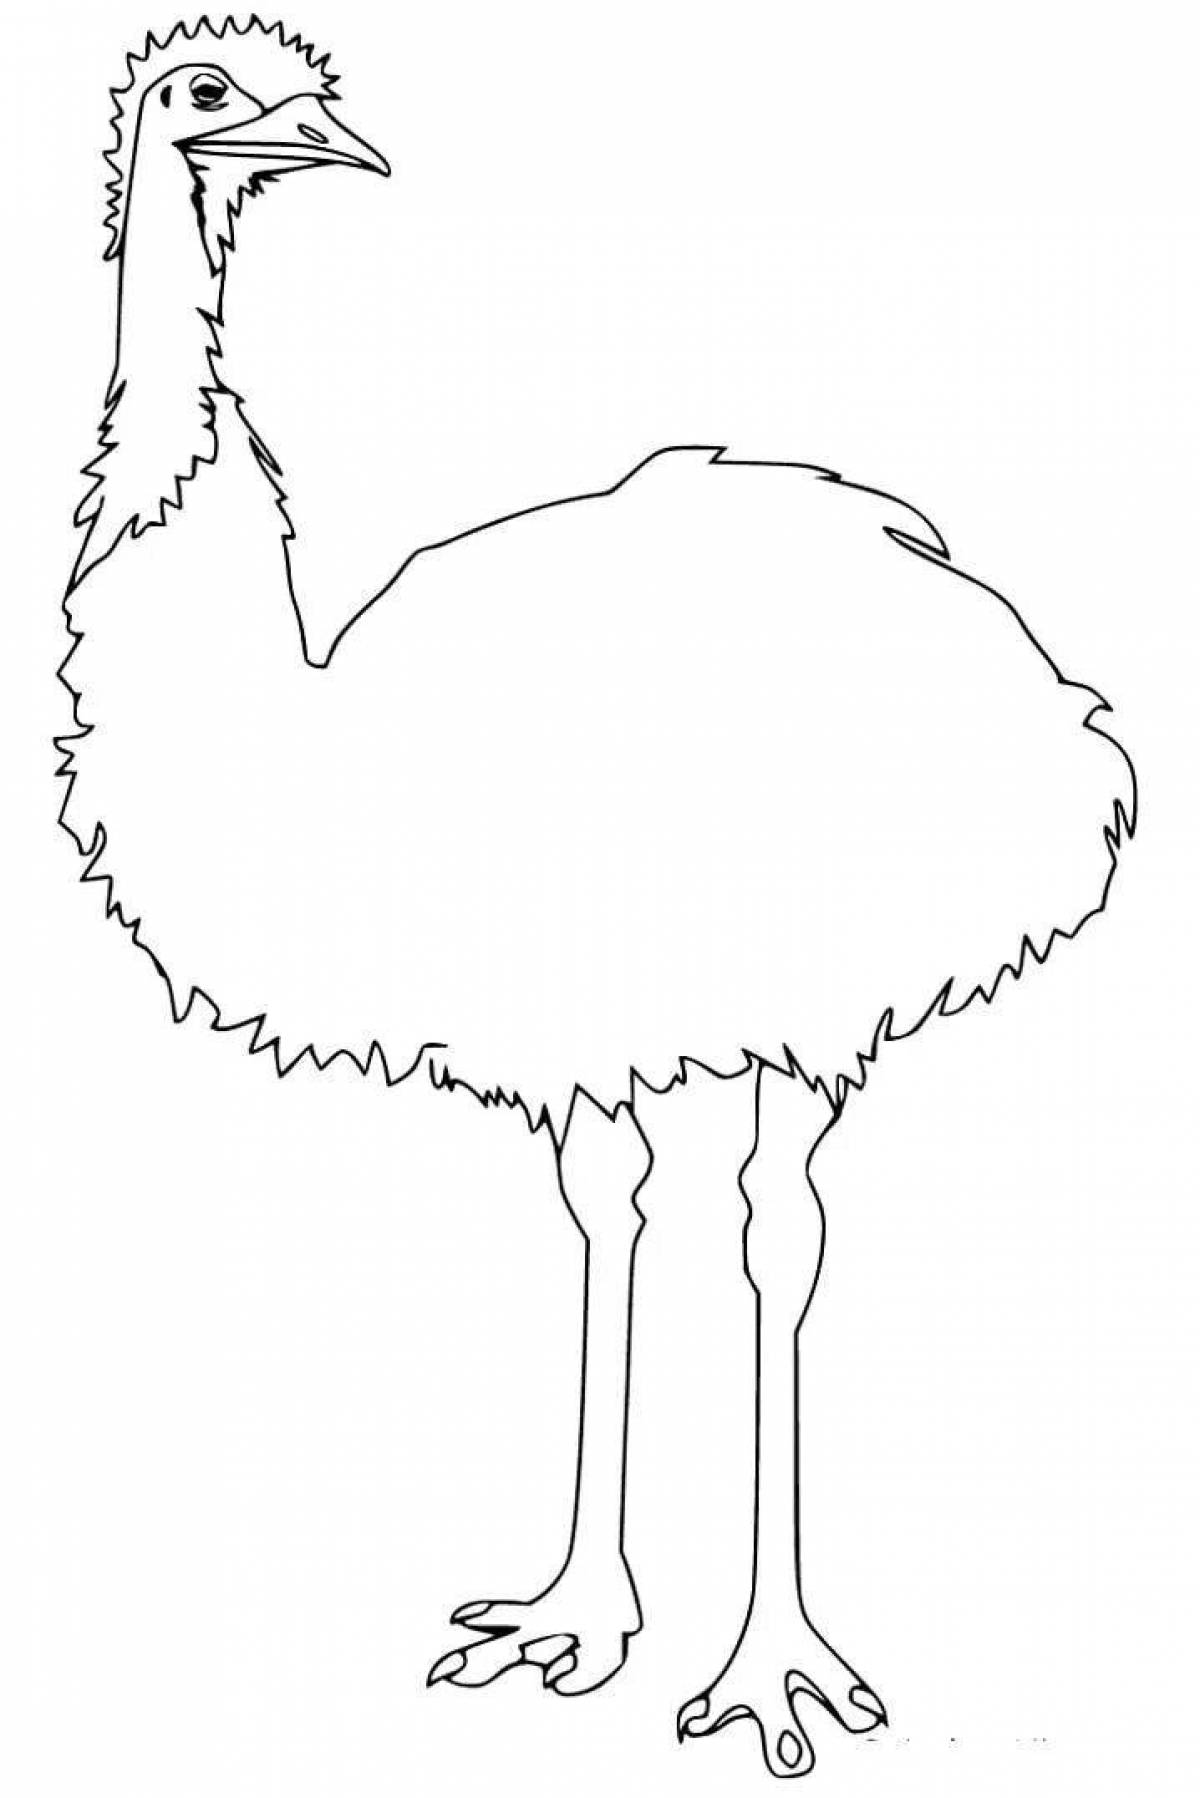 Exciting emu coloring book